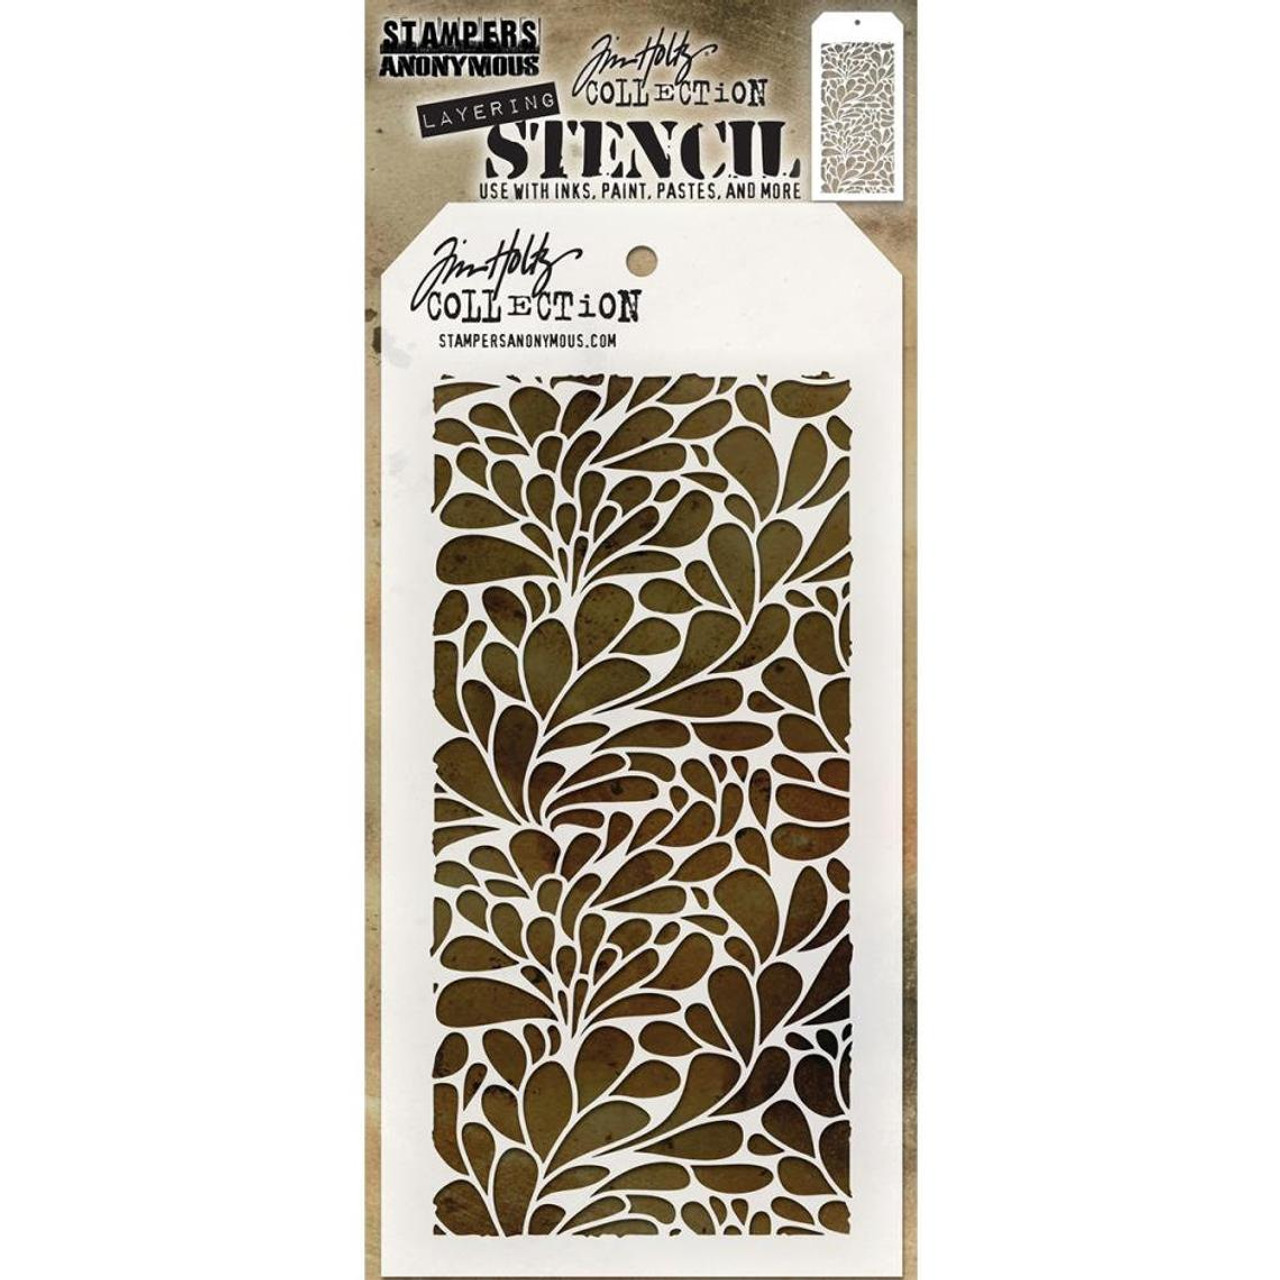 Splash Layering Stencil - Stampers Anonymous - Tim Holtz- Great for backgrounds!